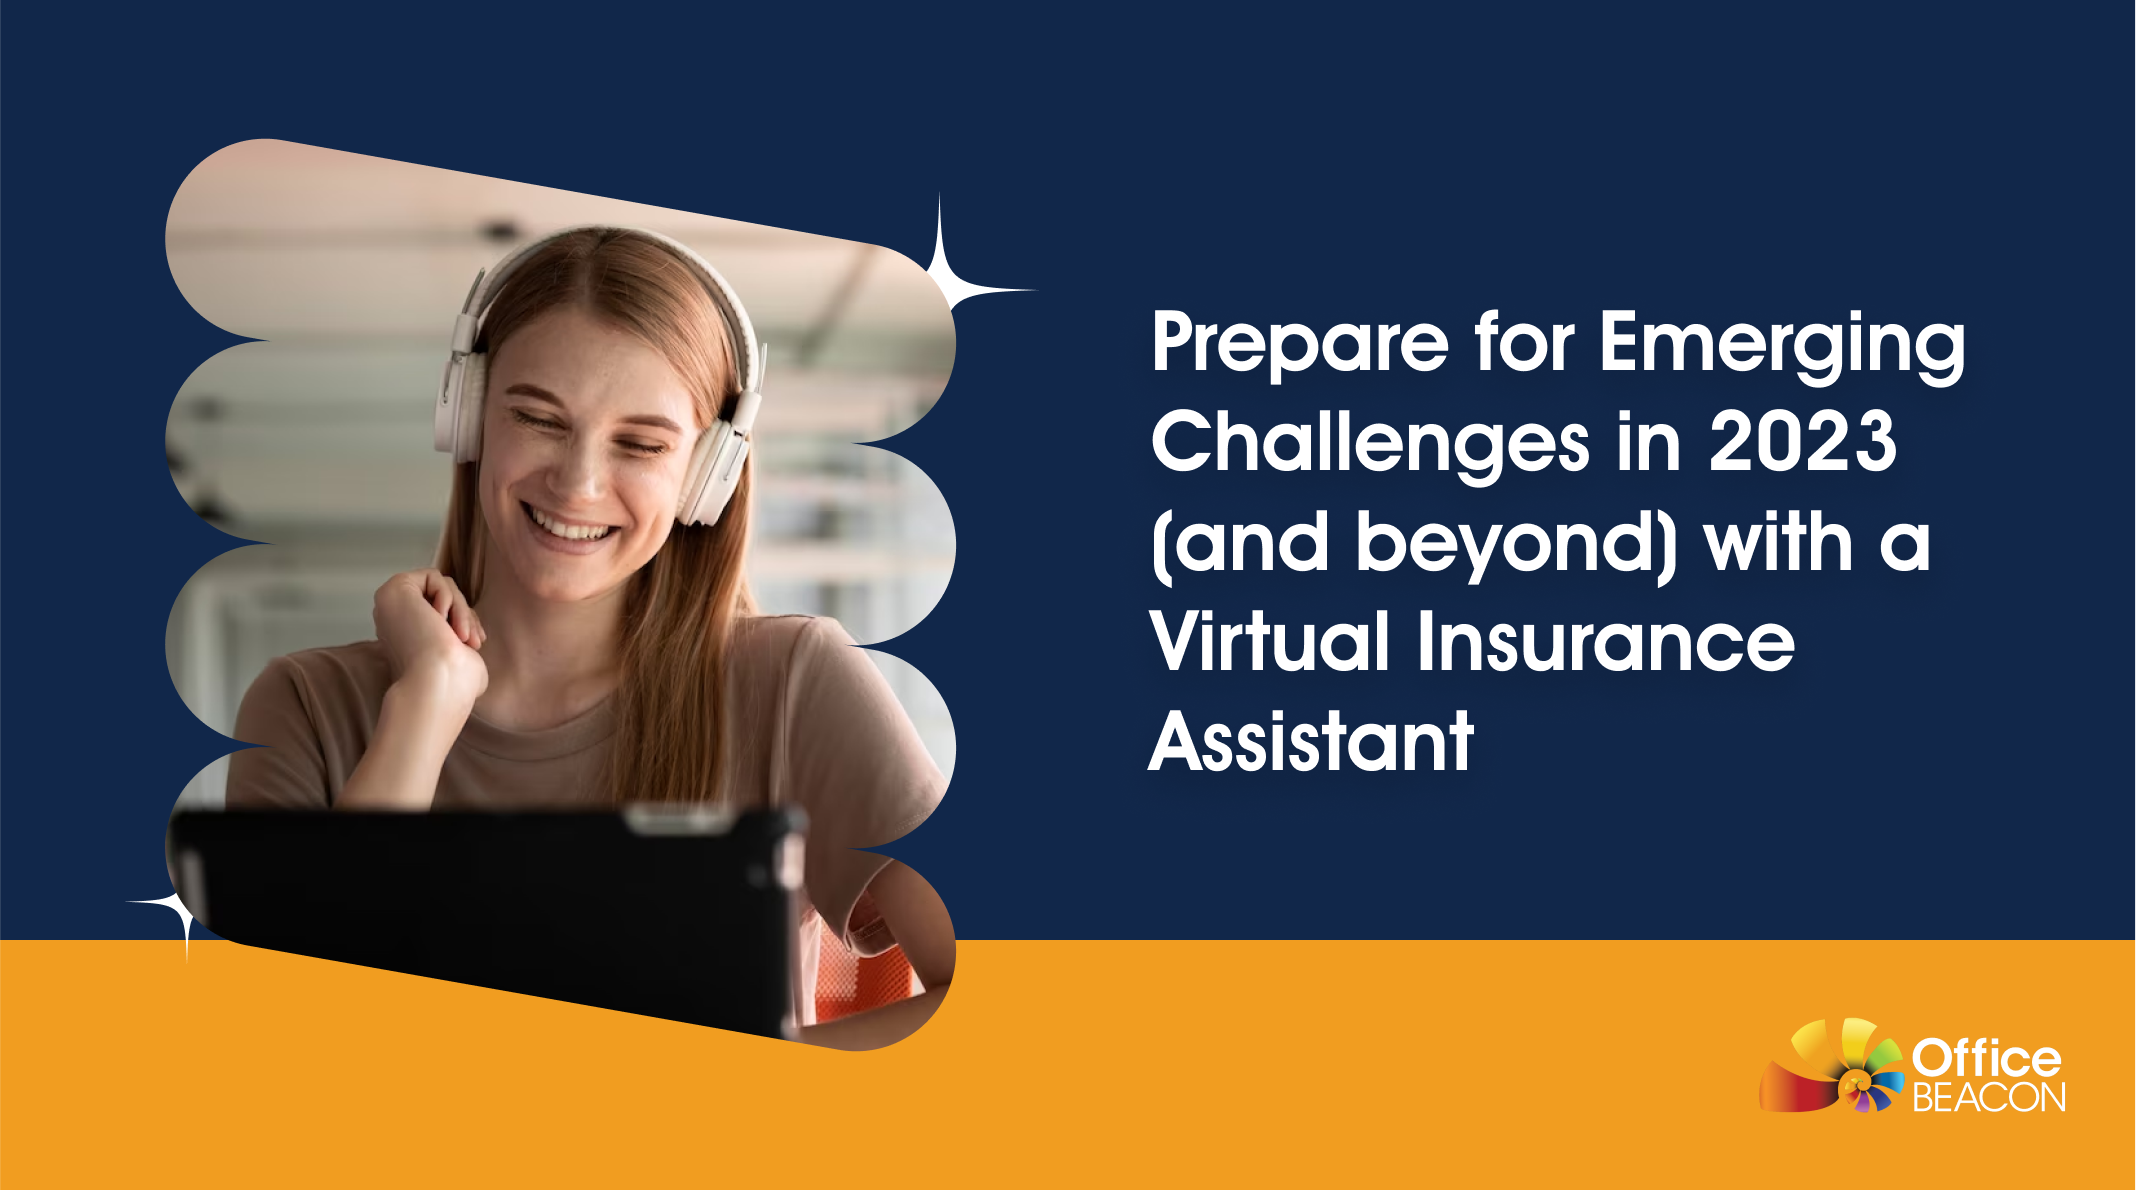 Prepare for Emerging Challenges in 2023 (and beyond) with a Virtual Insurance Assistant